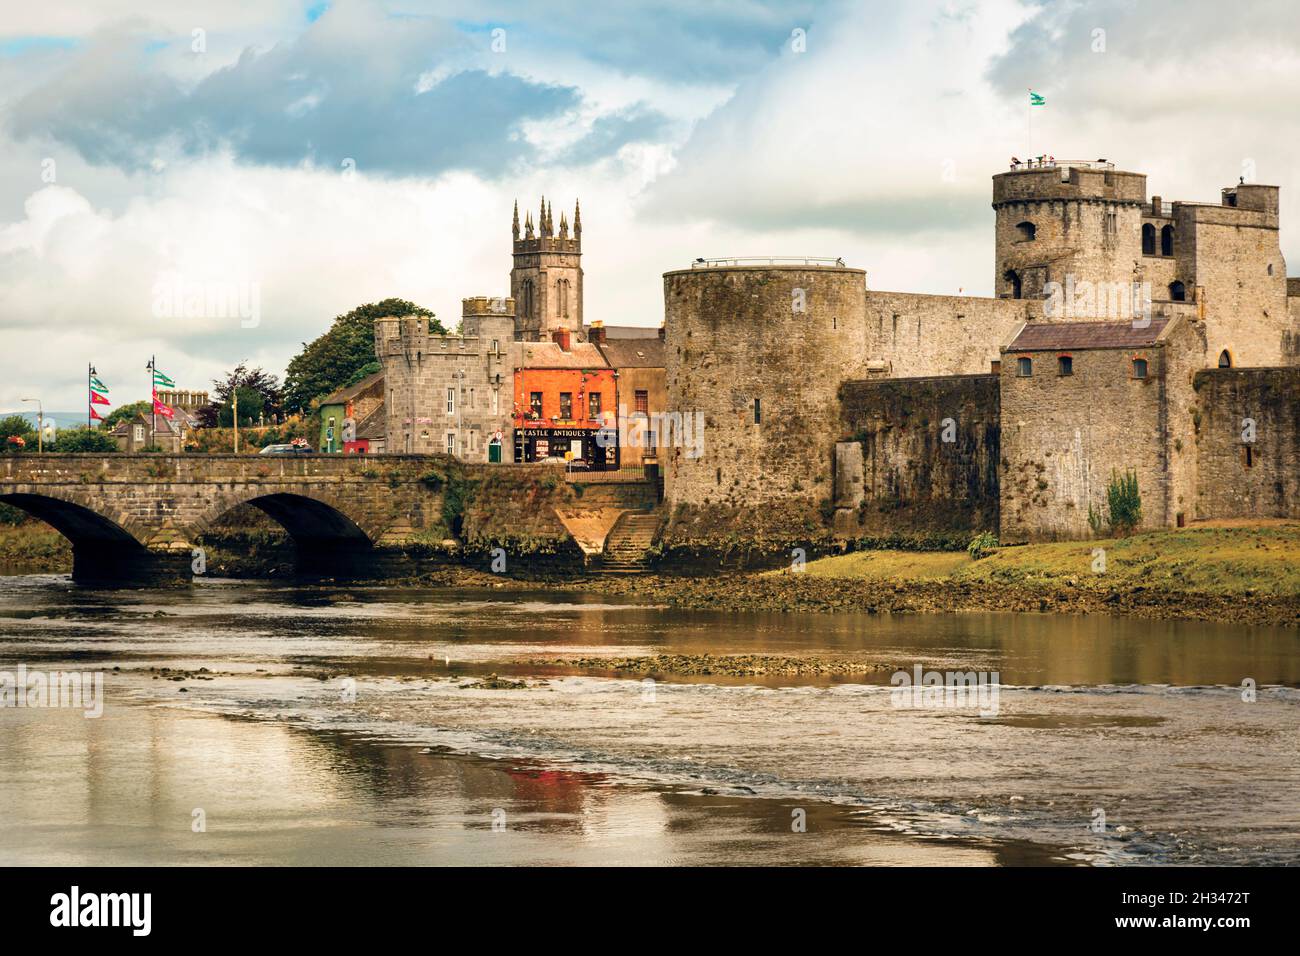 Limerick, County Limerick, Republic of Ireland. Eire. King John's Castle beside the River Shannon.  The castle was built in the 13th century and is am Stock Photo